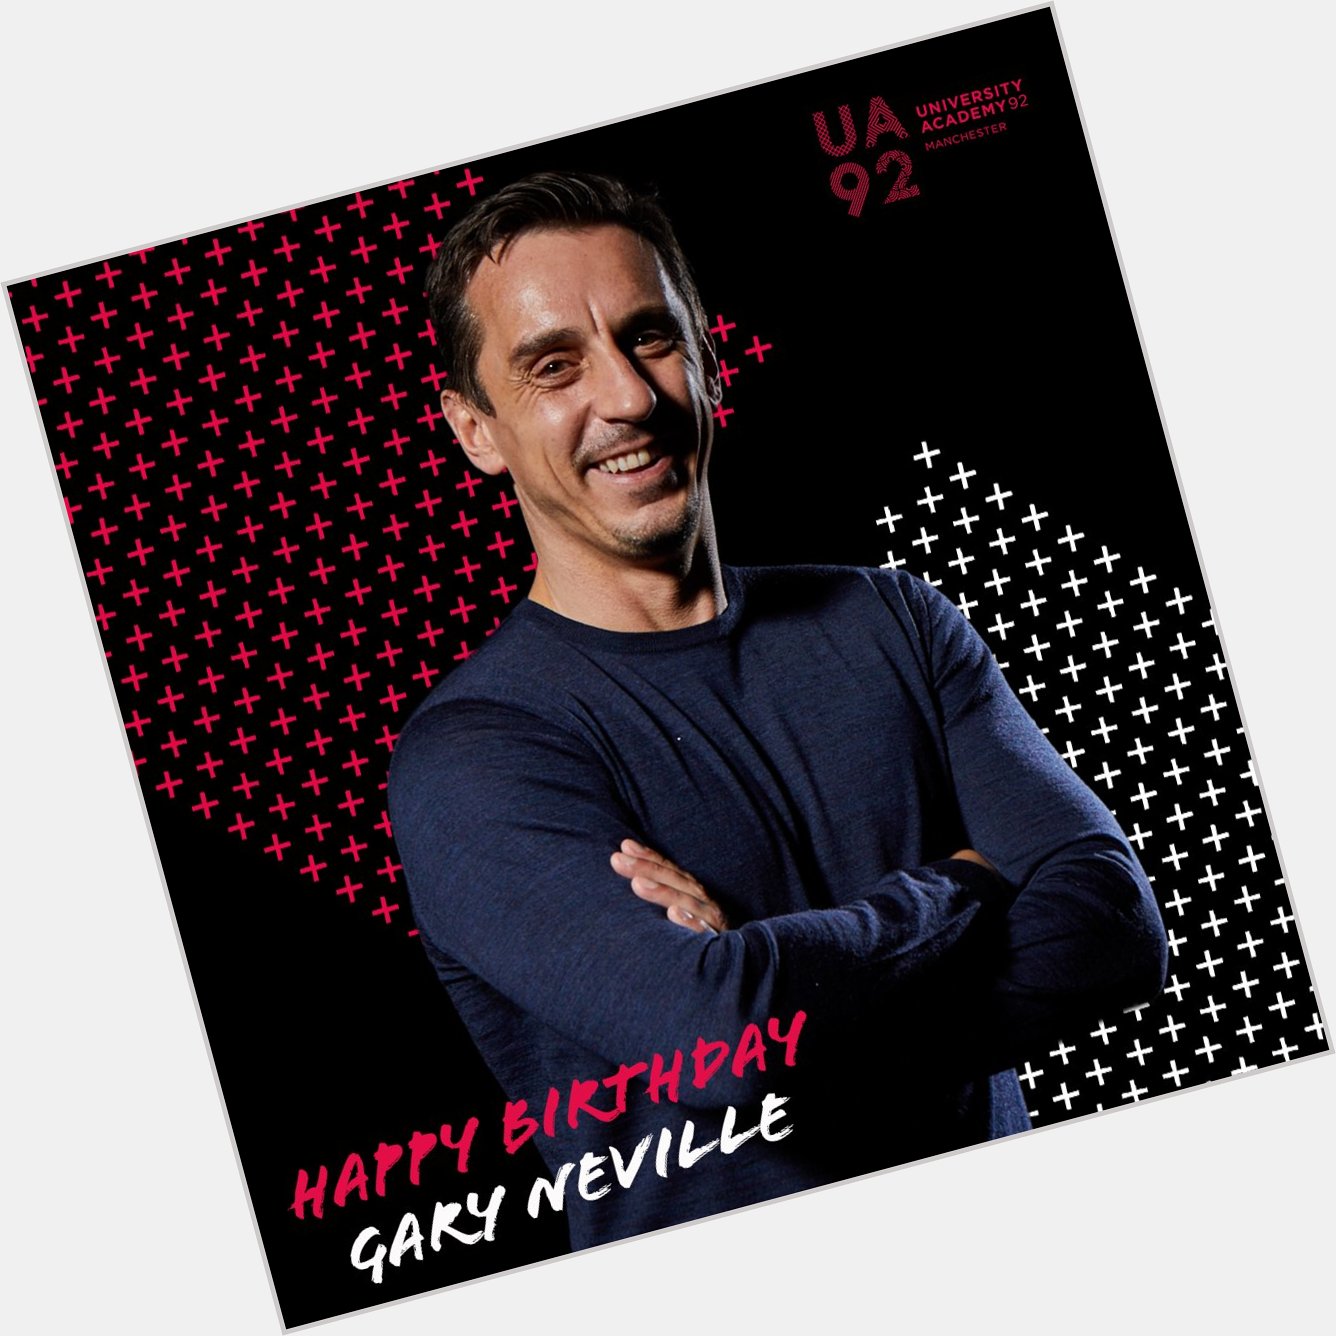 Happy birthday to our Co-Founder, Gary Neville!

Have a great day,   